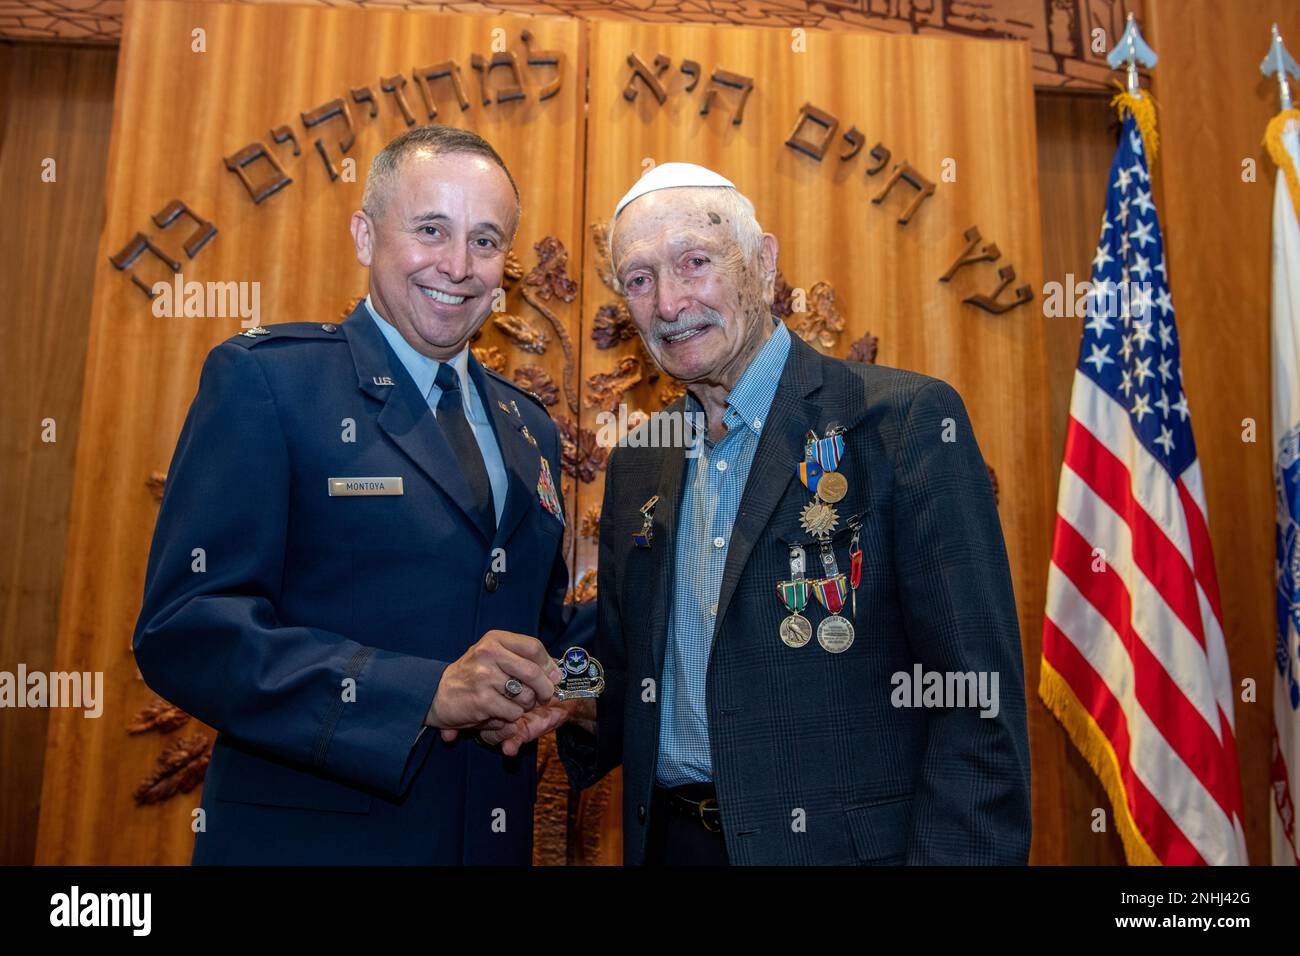 U.S. Air Force Chaplain (Col.) Charles Montoya, Jr. (left), presents a Joint Base San Antonio Senior Chaplain coin to Army Air Corps 1st Lt. Gerald Teldon, retired, after his awards ceremony for his honorable service as a pilot on July 29, 2022, at the Chabad Center for Jewish Life and Learning, San Antonio, Texas. Teldon, born in the Bronx, N.Y., in 1924, joined the military in 1944. He completed 62 missions during WWII and the Korean War. Lt. Col. Andrew Stein, 502nd Operations Support Squadron commander, was the presiding officer. The awards presented to Teldon are as follows: the Air Medal Stock Photo